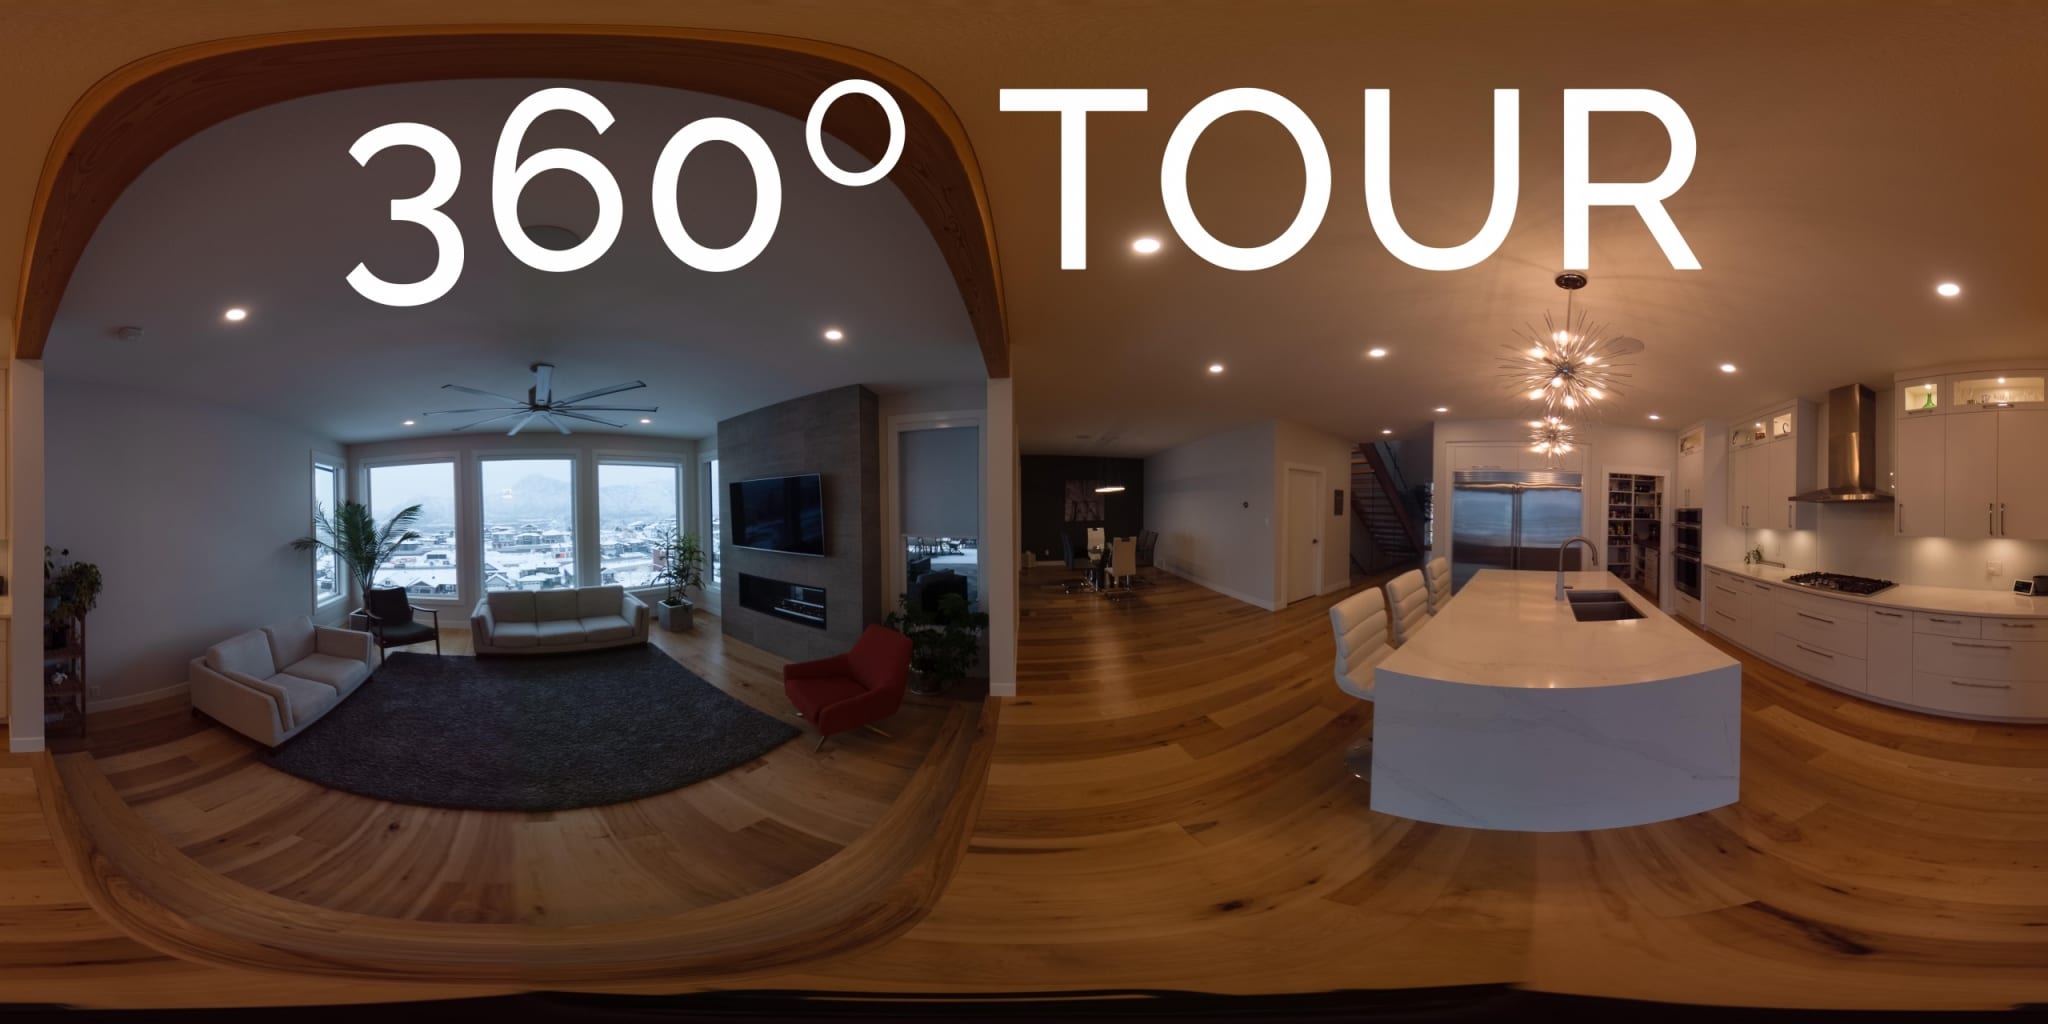 360 picture of great room with caption 360 Tour